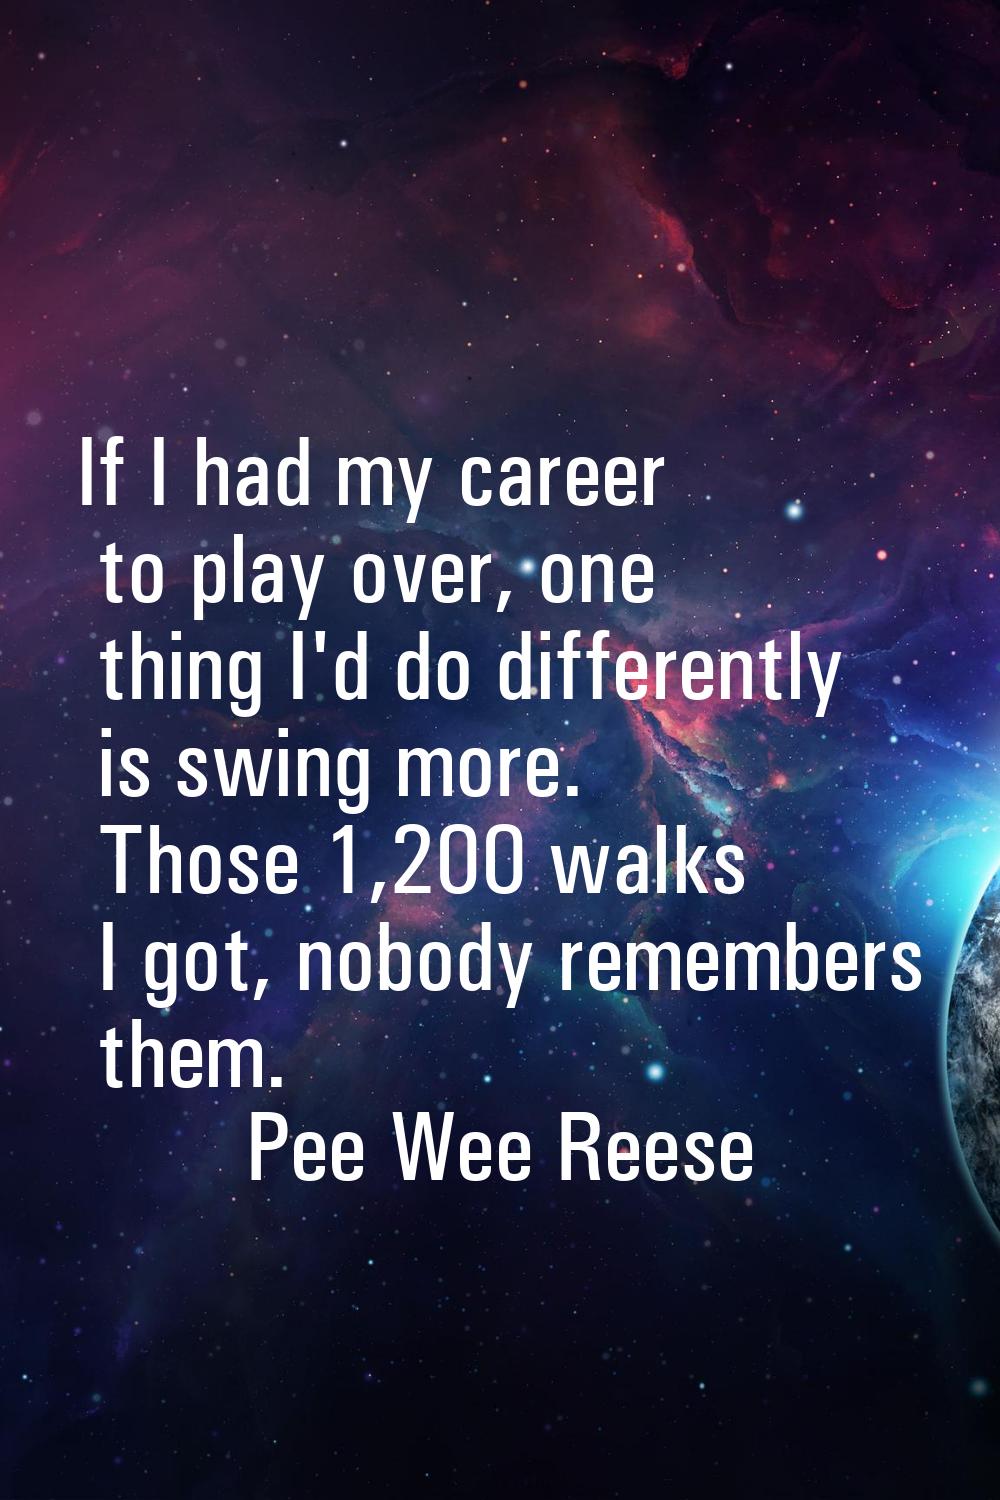 If I had my career to play over, one thing I'd do differently is swing more. Those 1,200 walks I go